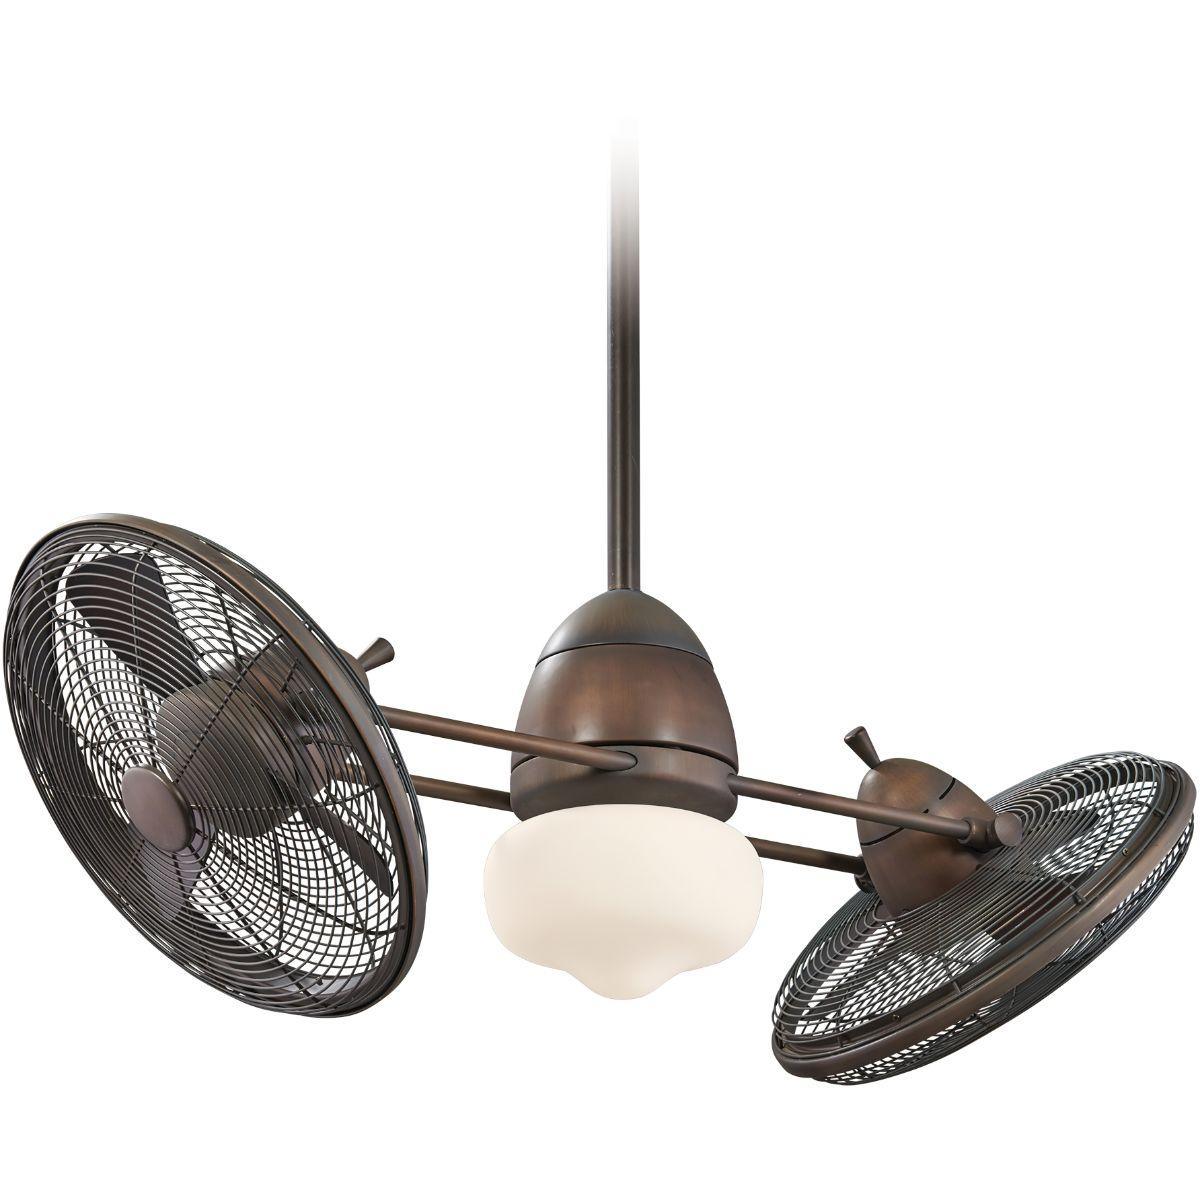 Gyro 42 Inch Modern Dual Ceiling Fan With Light, Wall Control Included - Bees Lighting